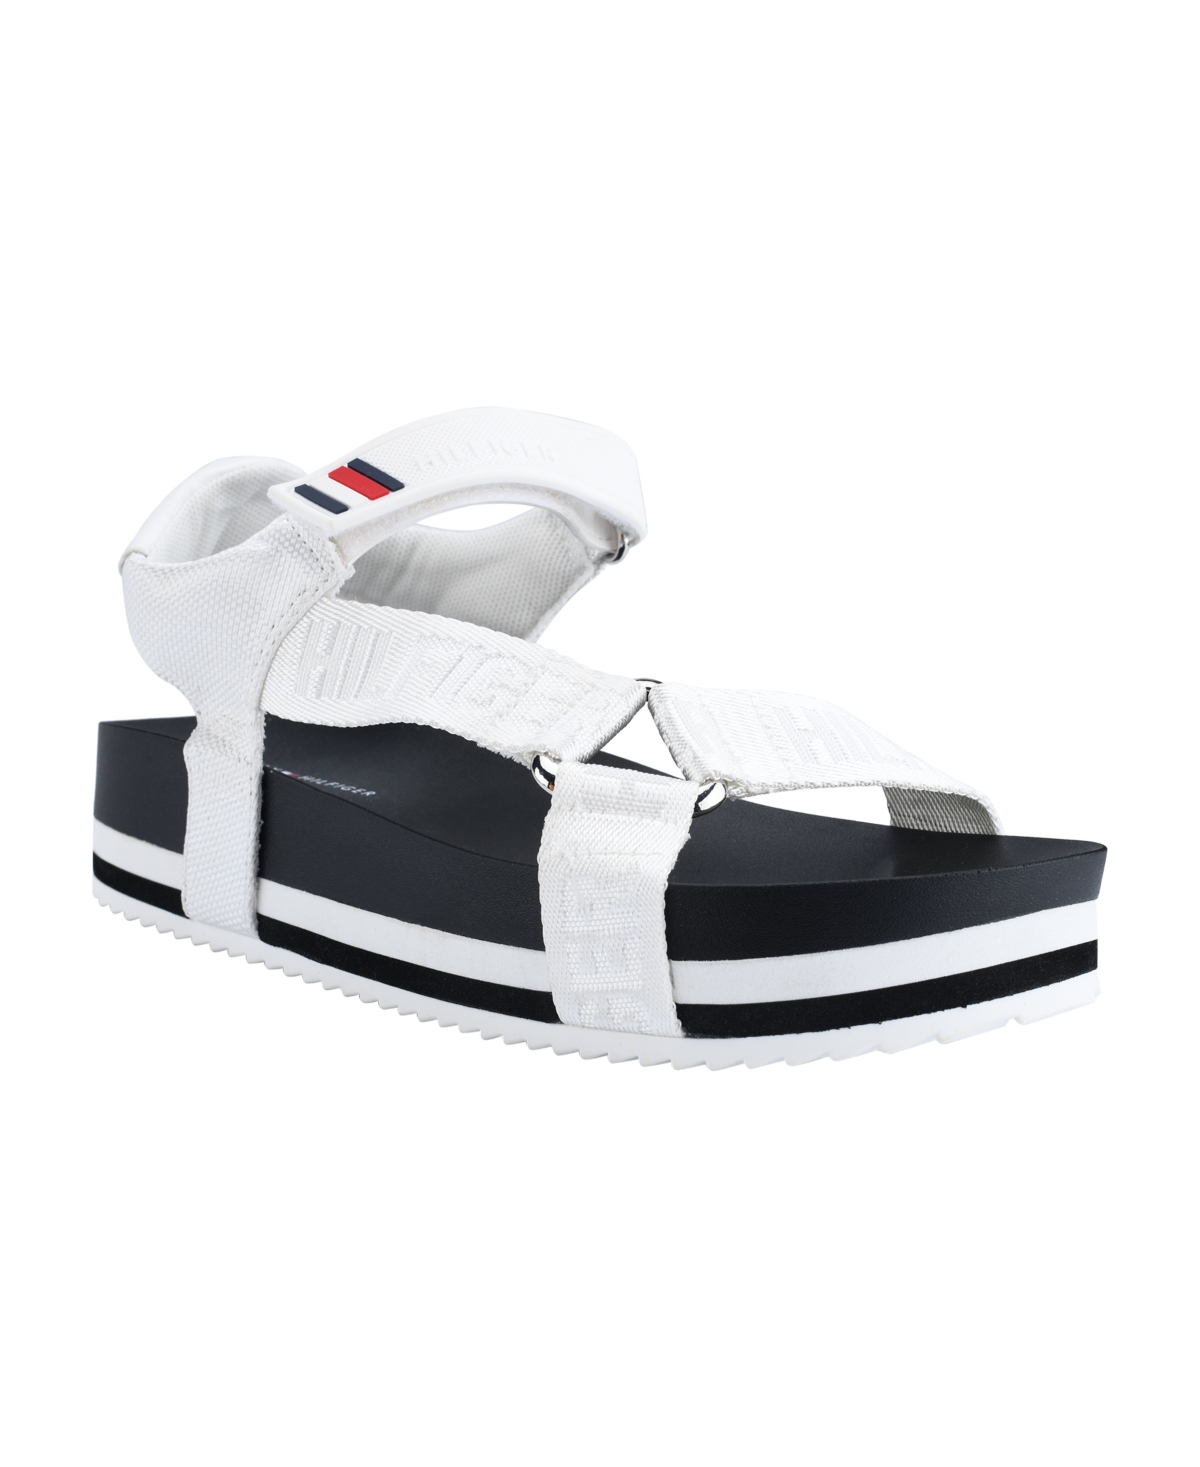 UPC 196301399193 product image for Tommy Hilfiger Women's Beckia Footbed Sandals Women's Shoes | upcitemdb.com